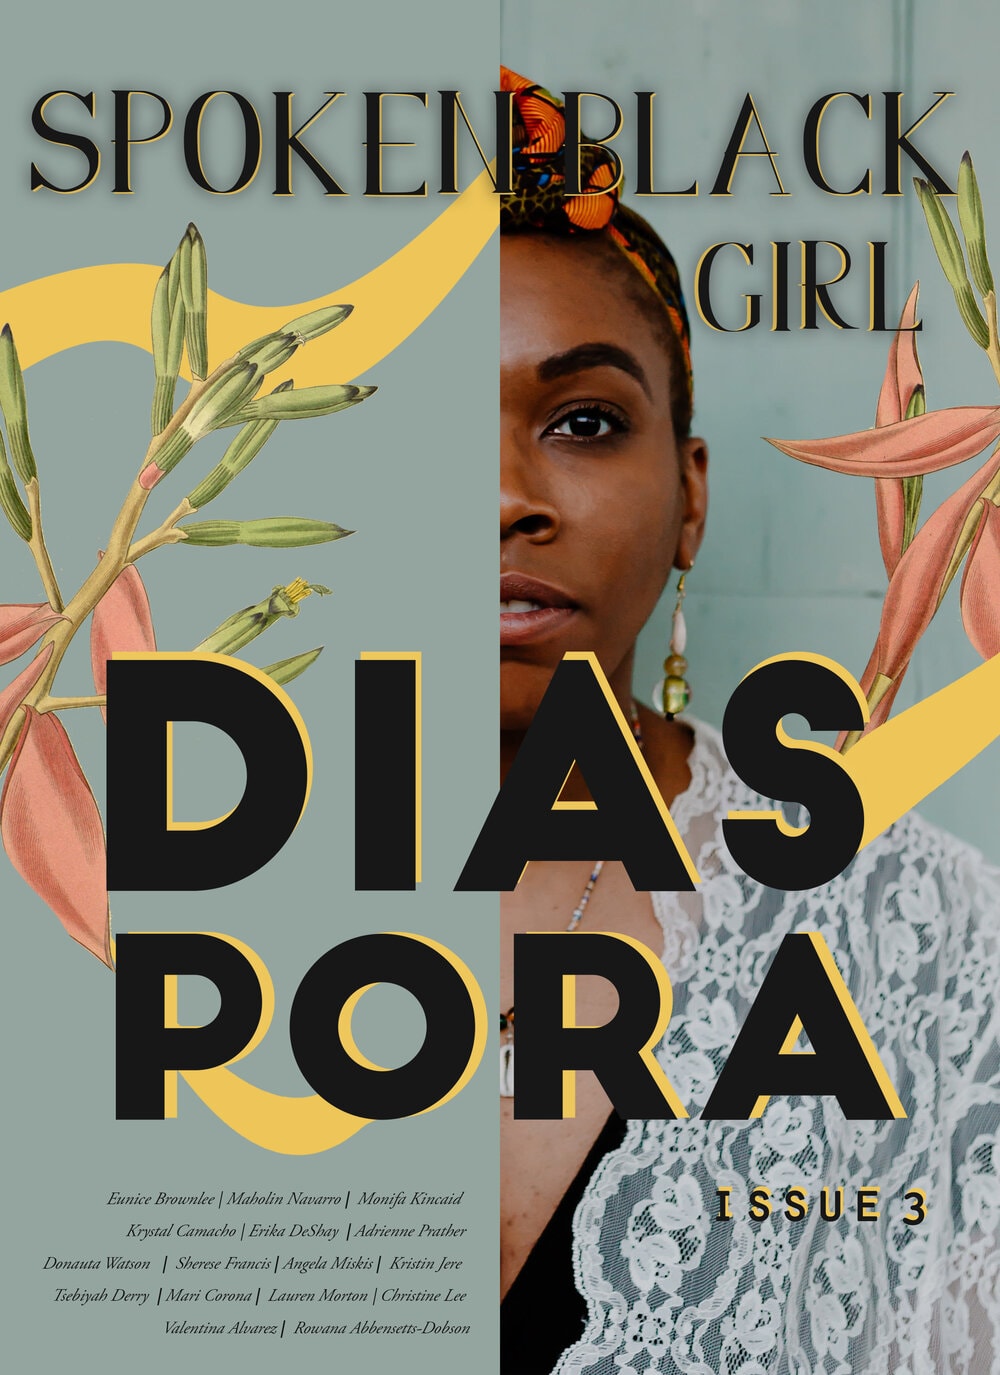 The cover of Spoken Black Girl's Issue 3 Diaspora. Features half of a black woman's face with the rest of the cover an abstract design in teal, yellow and coral